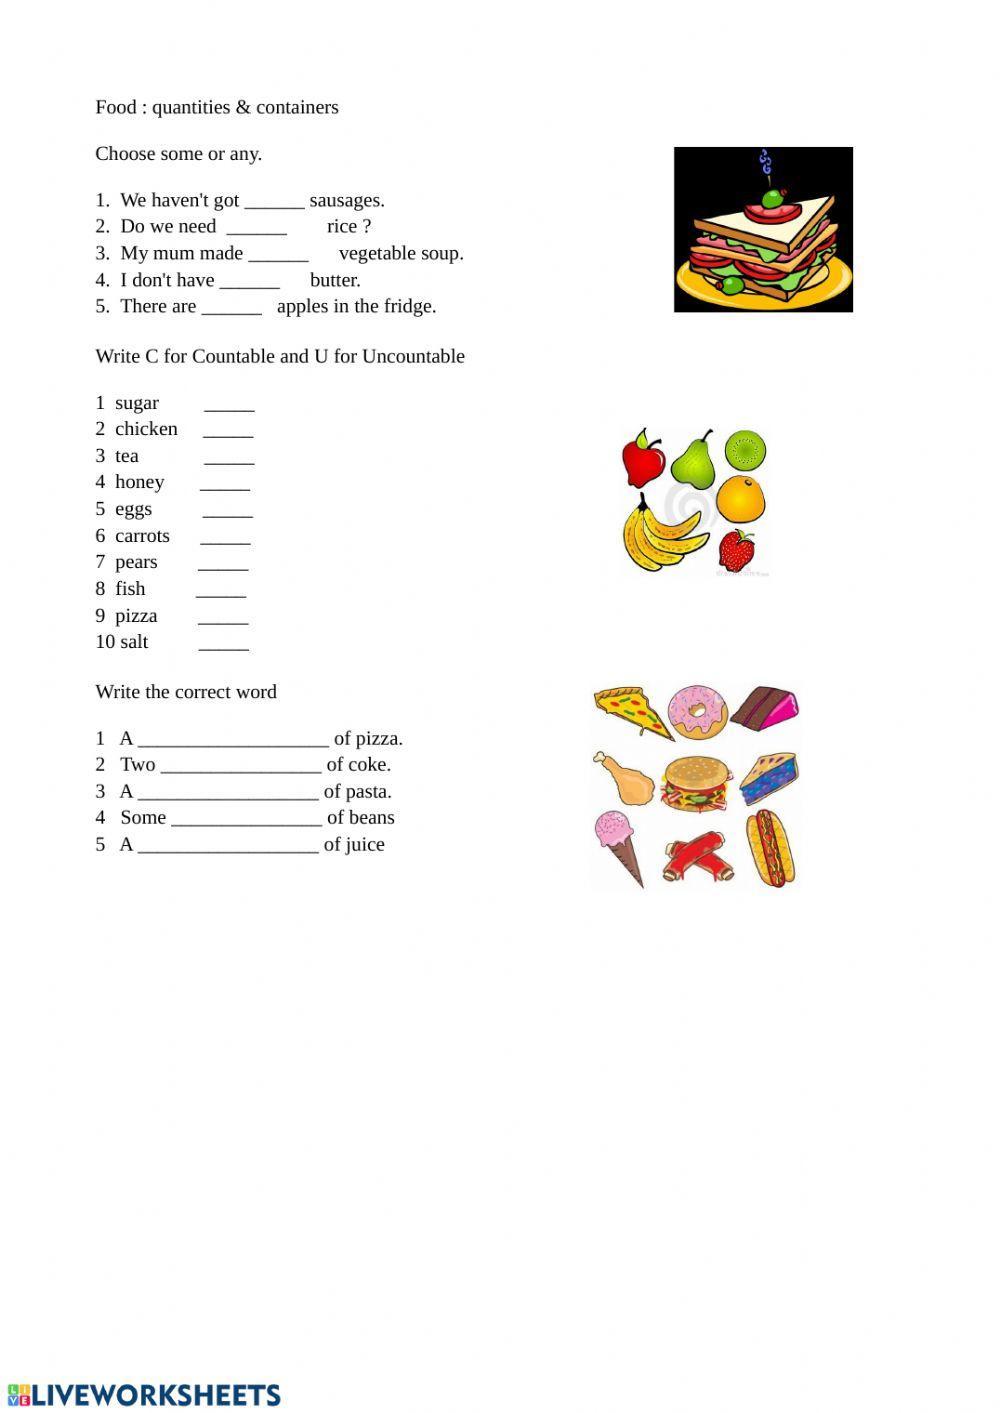 Food quantities & containers